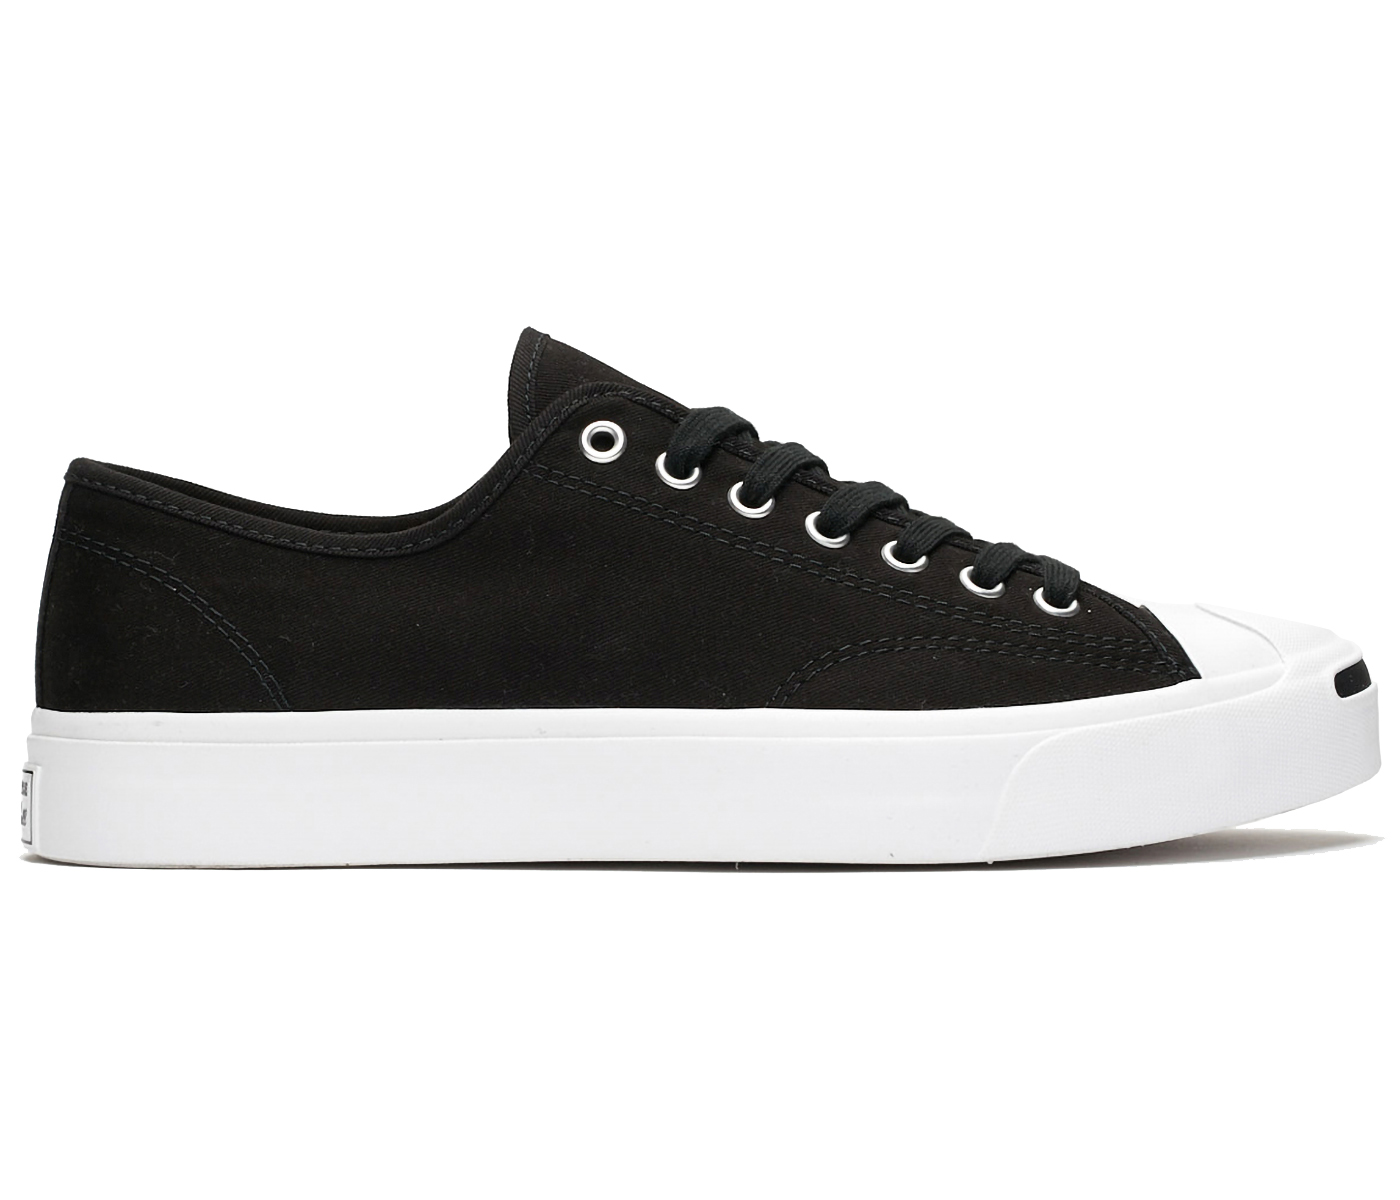 Converse Jack Purcell Canvas Low Black